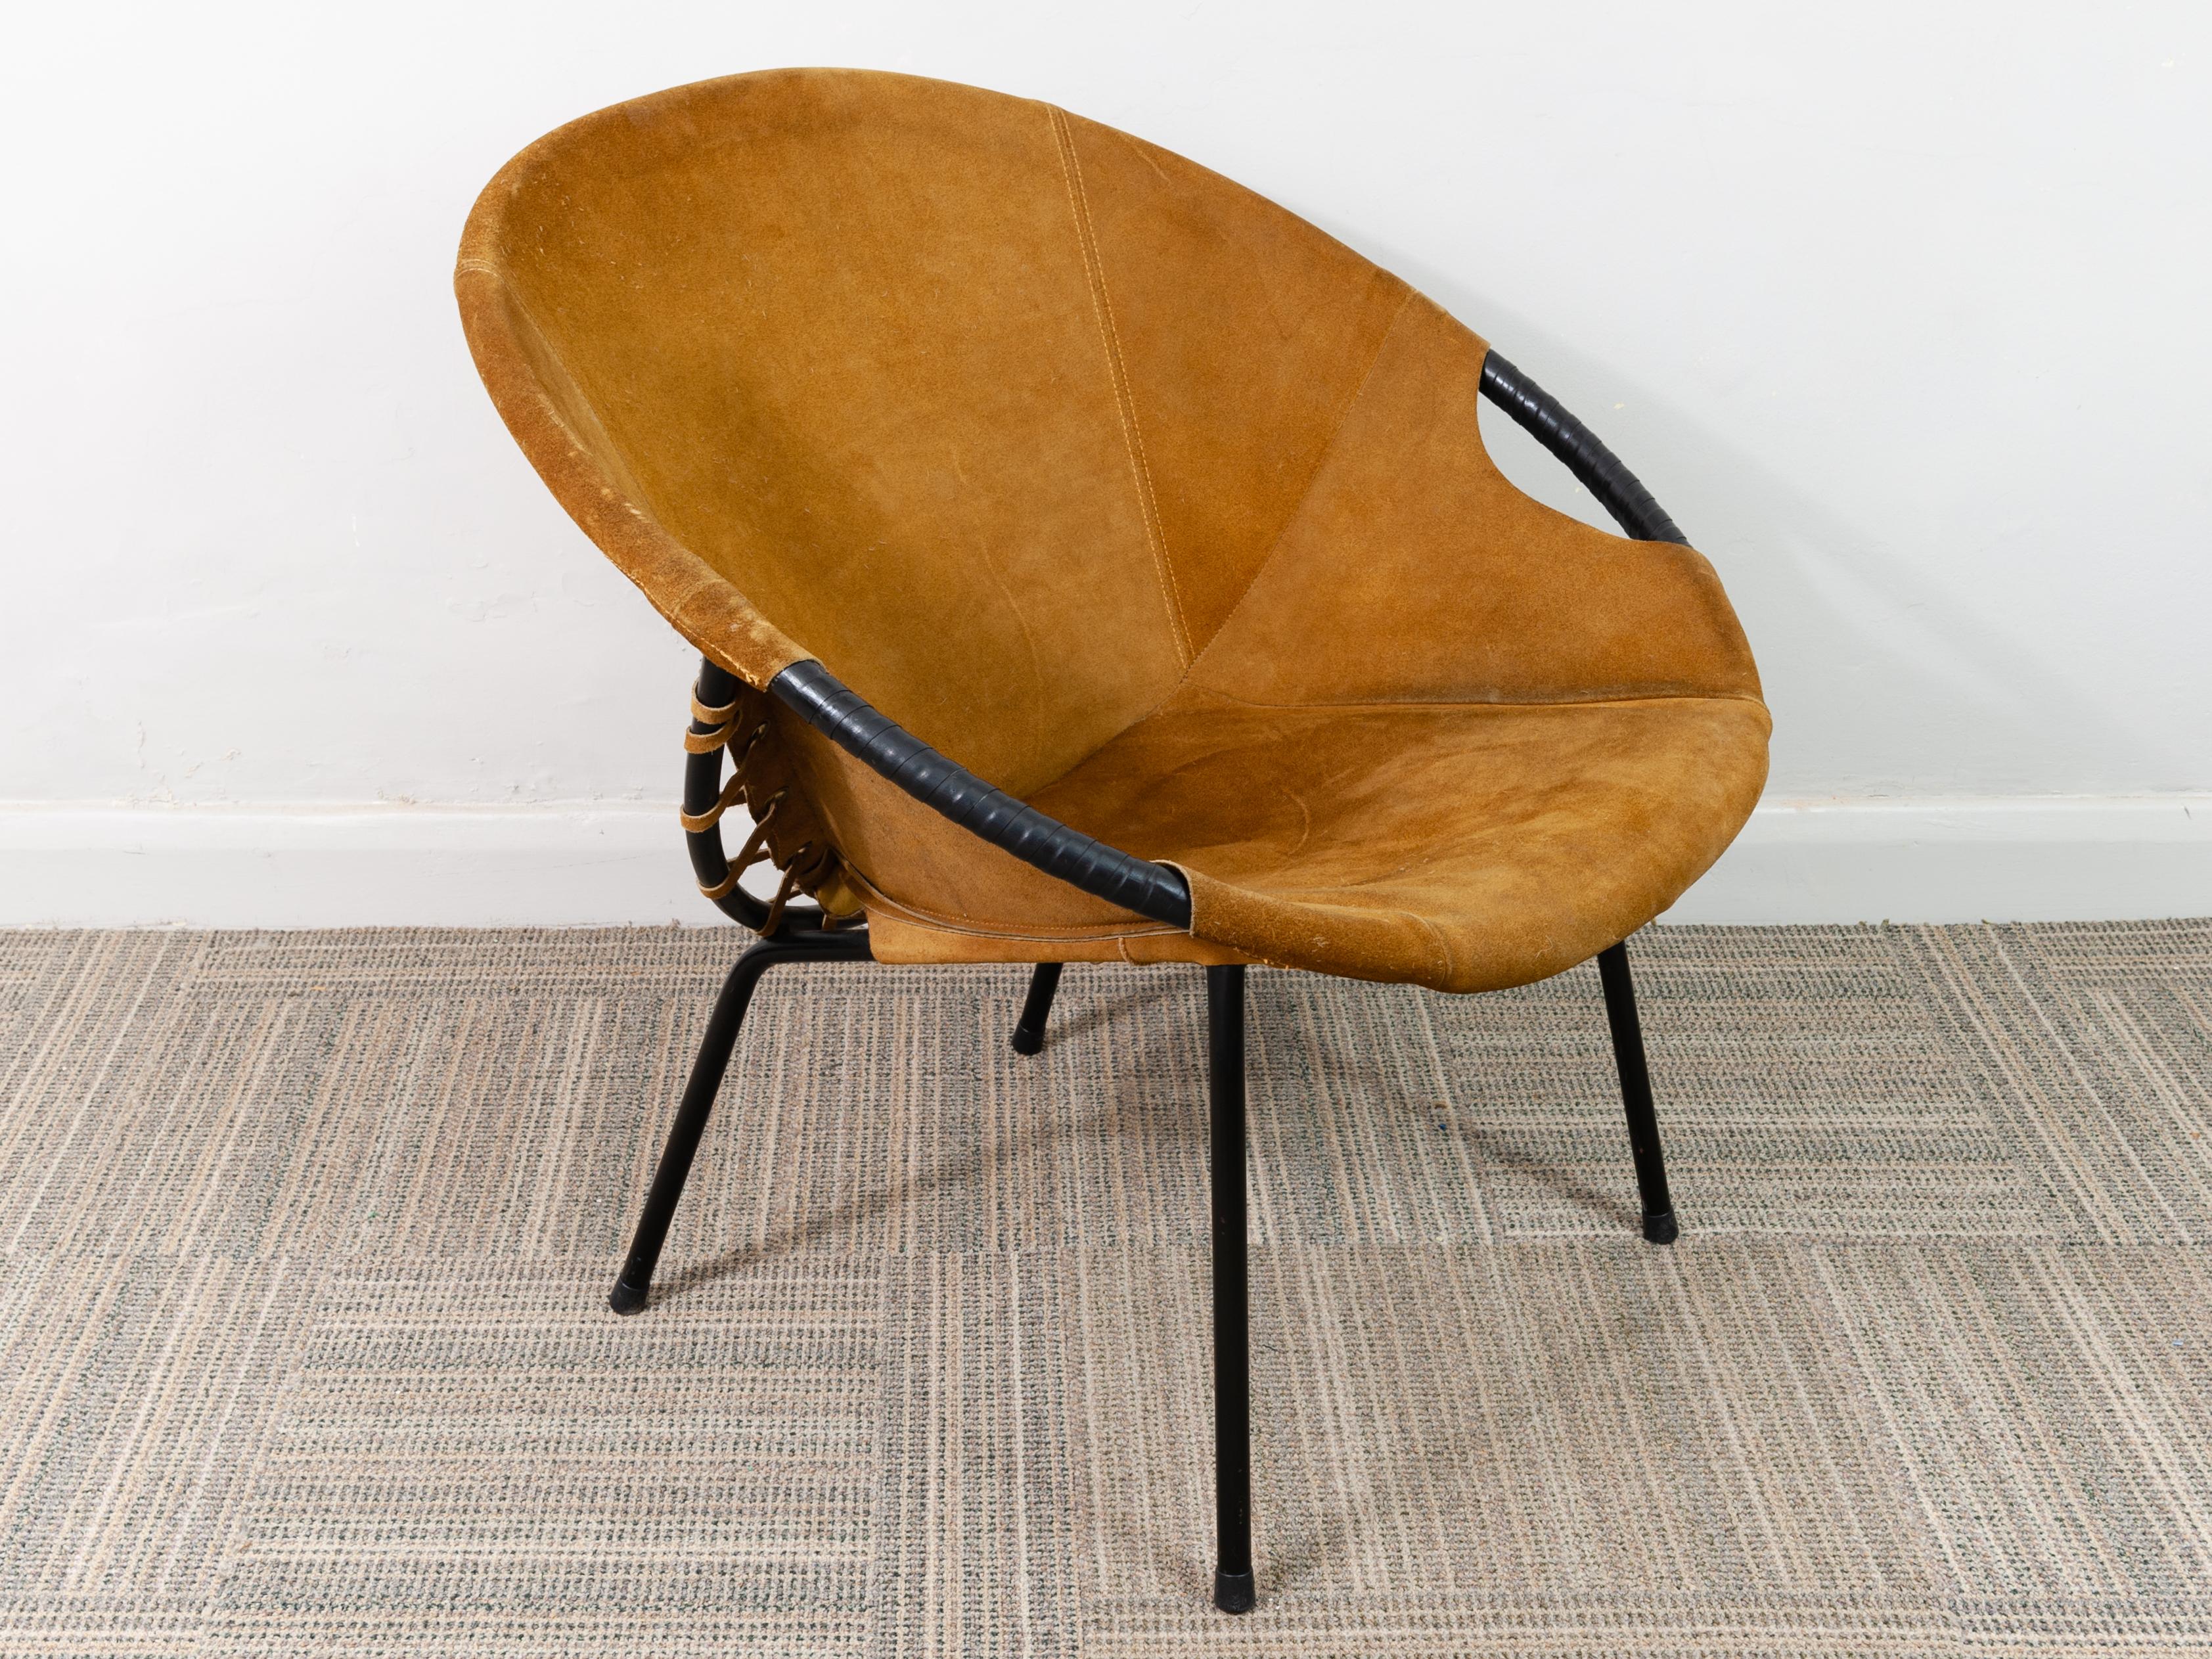 20th Century 1960s Suede Circle Balloon Chair by Lusch Erzeugnis for Lusch & Co.